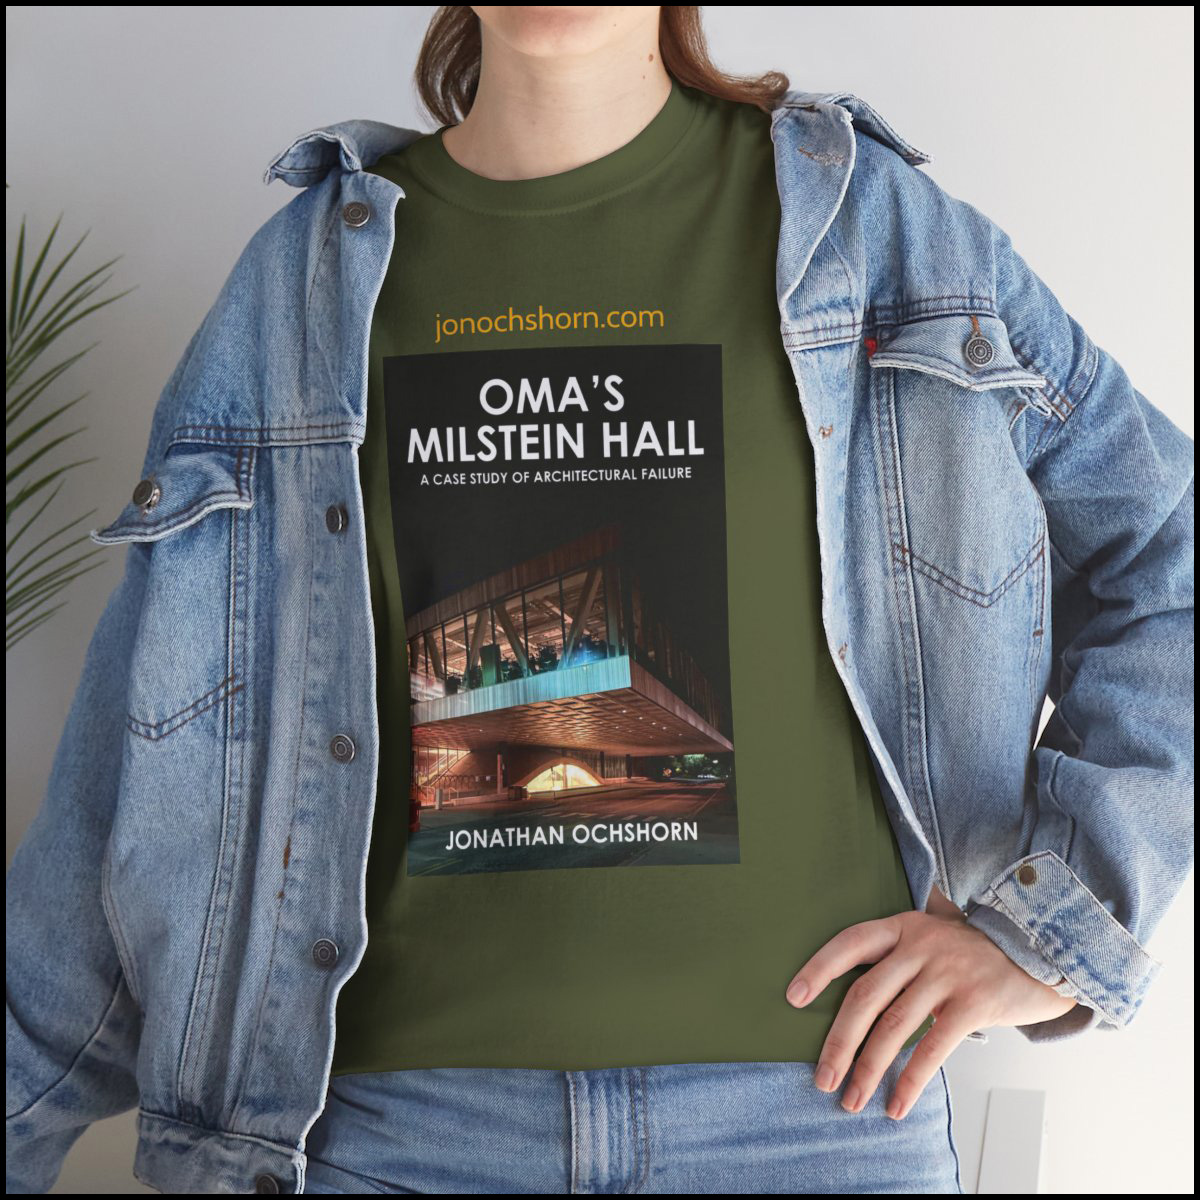 T-shirt design with OMA's Milstein Hall book cover